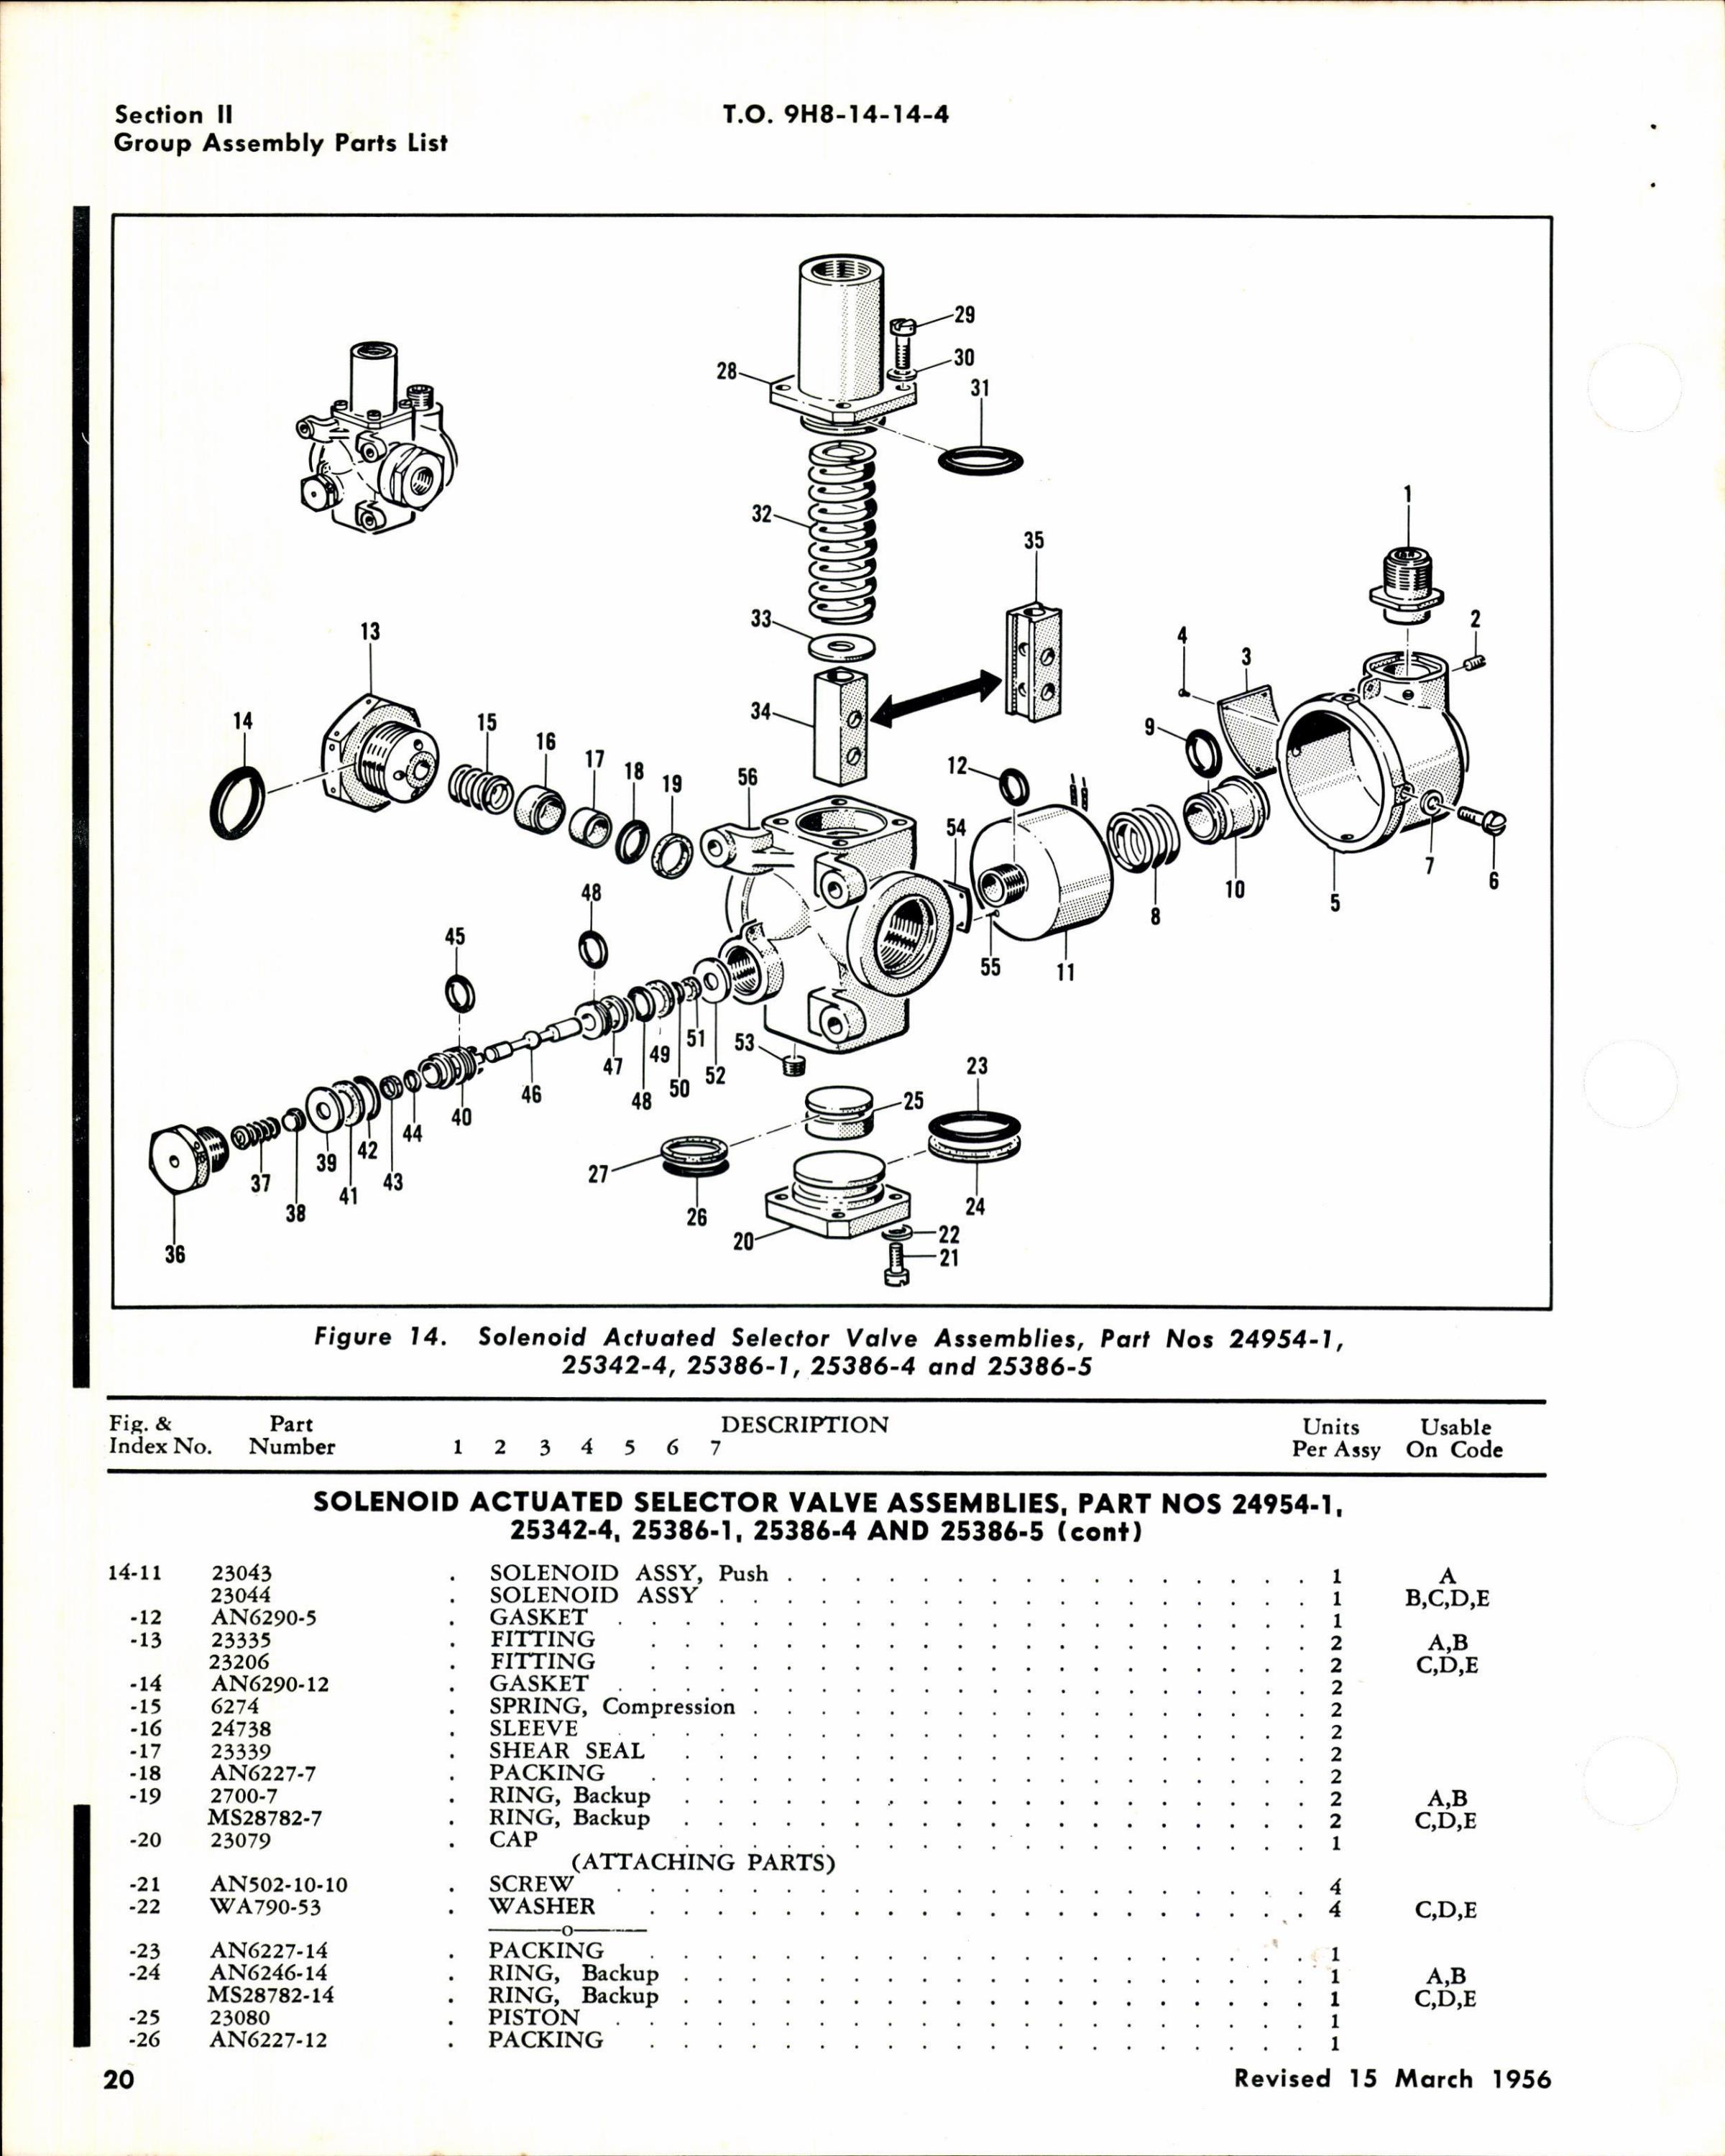 Sample page 6 from AirCorps Library document: Illustrated Parts Breakdown for Selector Valve Assemblies